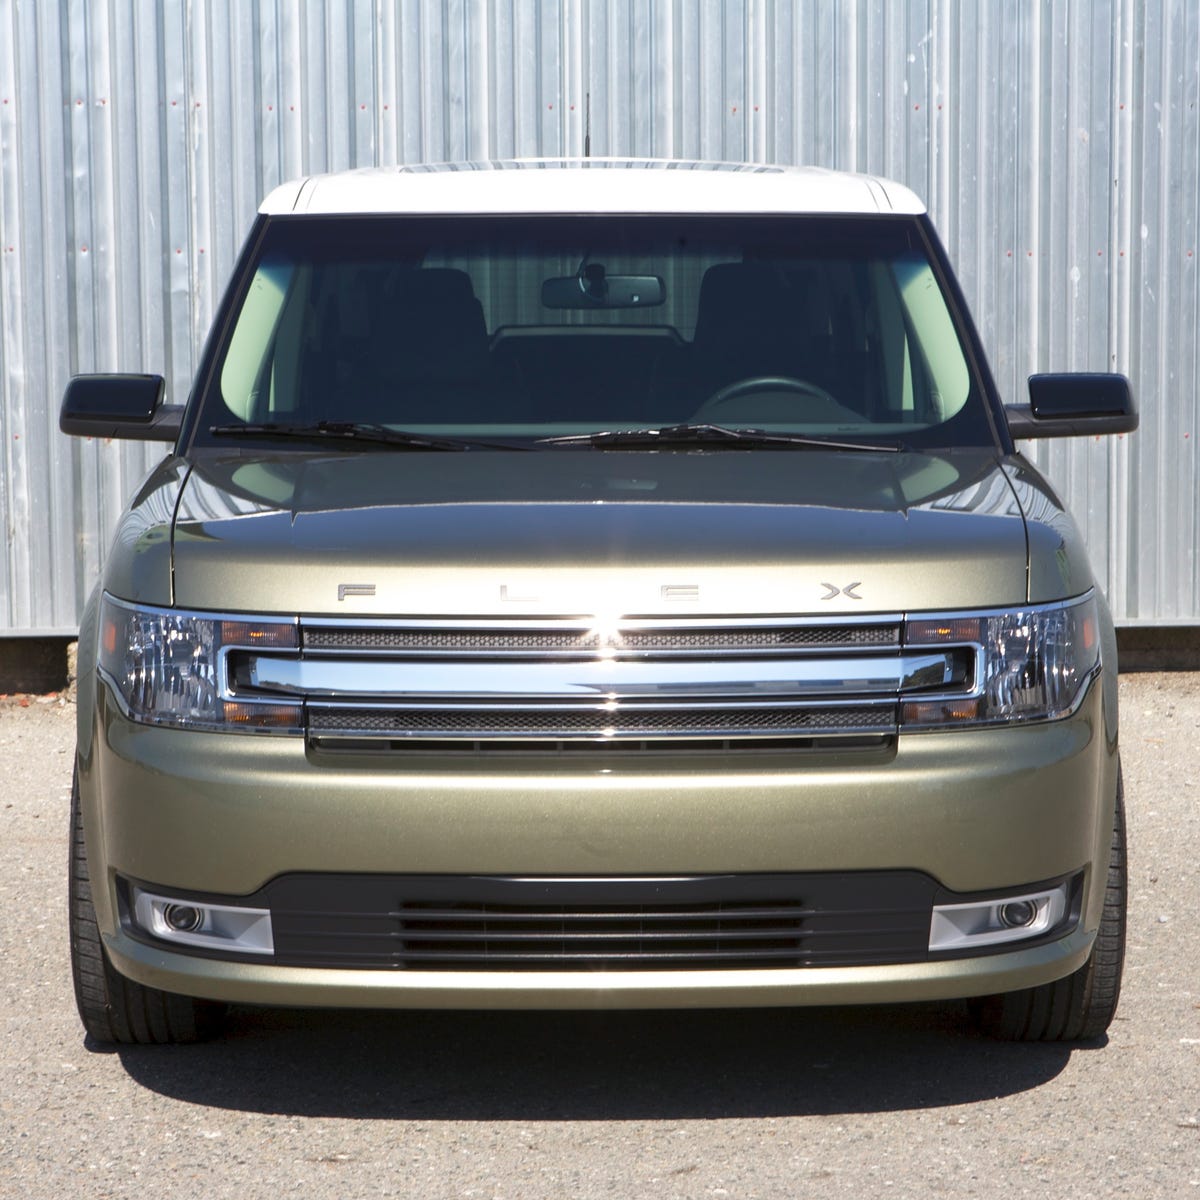 2013 Ford Flex SEL AWD review: Ford Flex wraps clever tech in boxy, retro  style - CNET